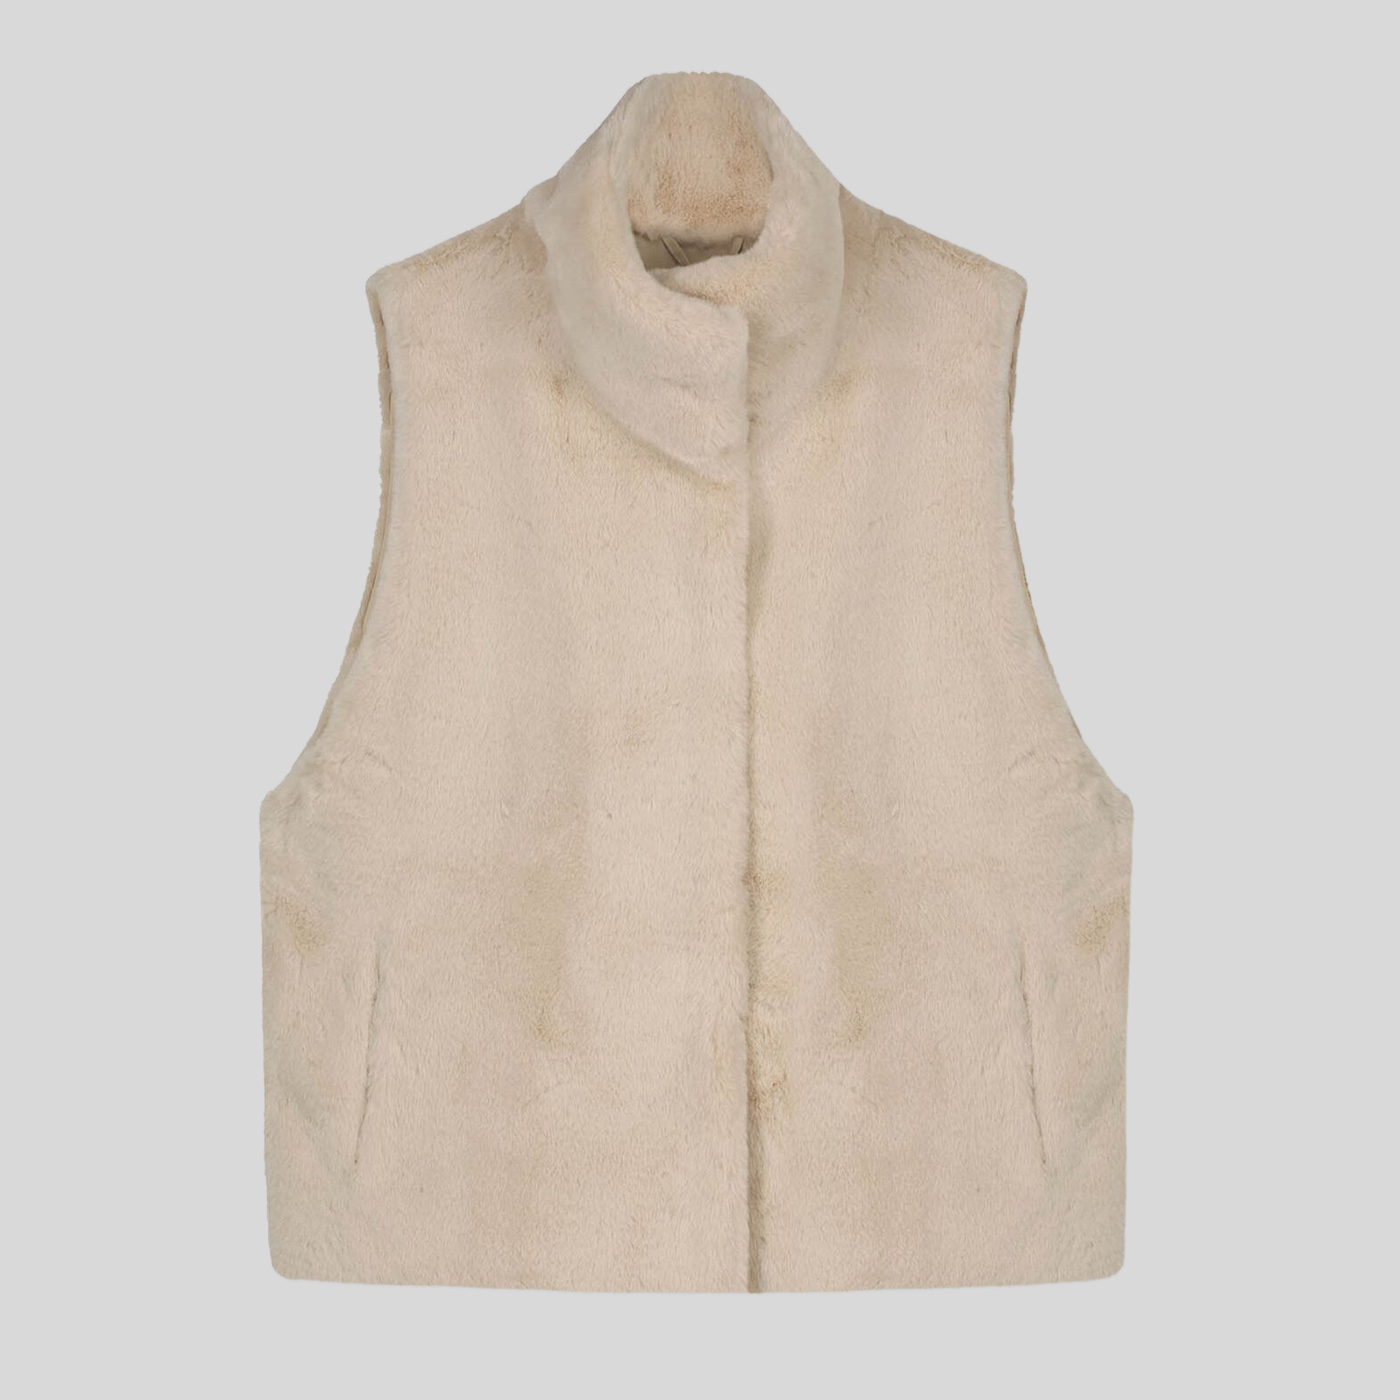 Gotstyle Fashion - Rino and Pelle Jackets Faux Fur High Collar Short Waistcoat - Stone